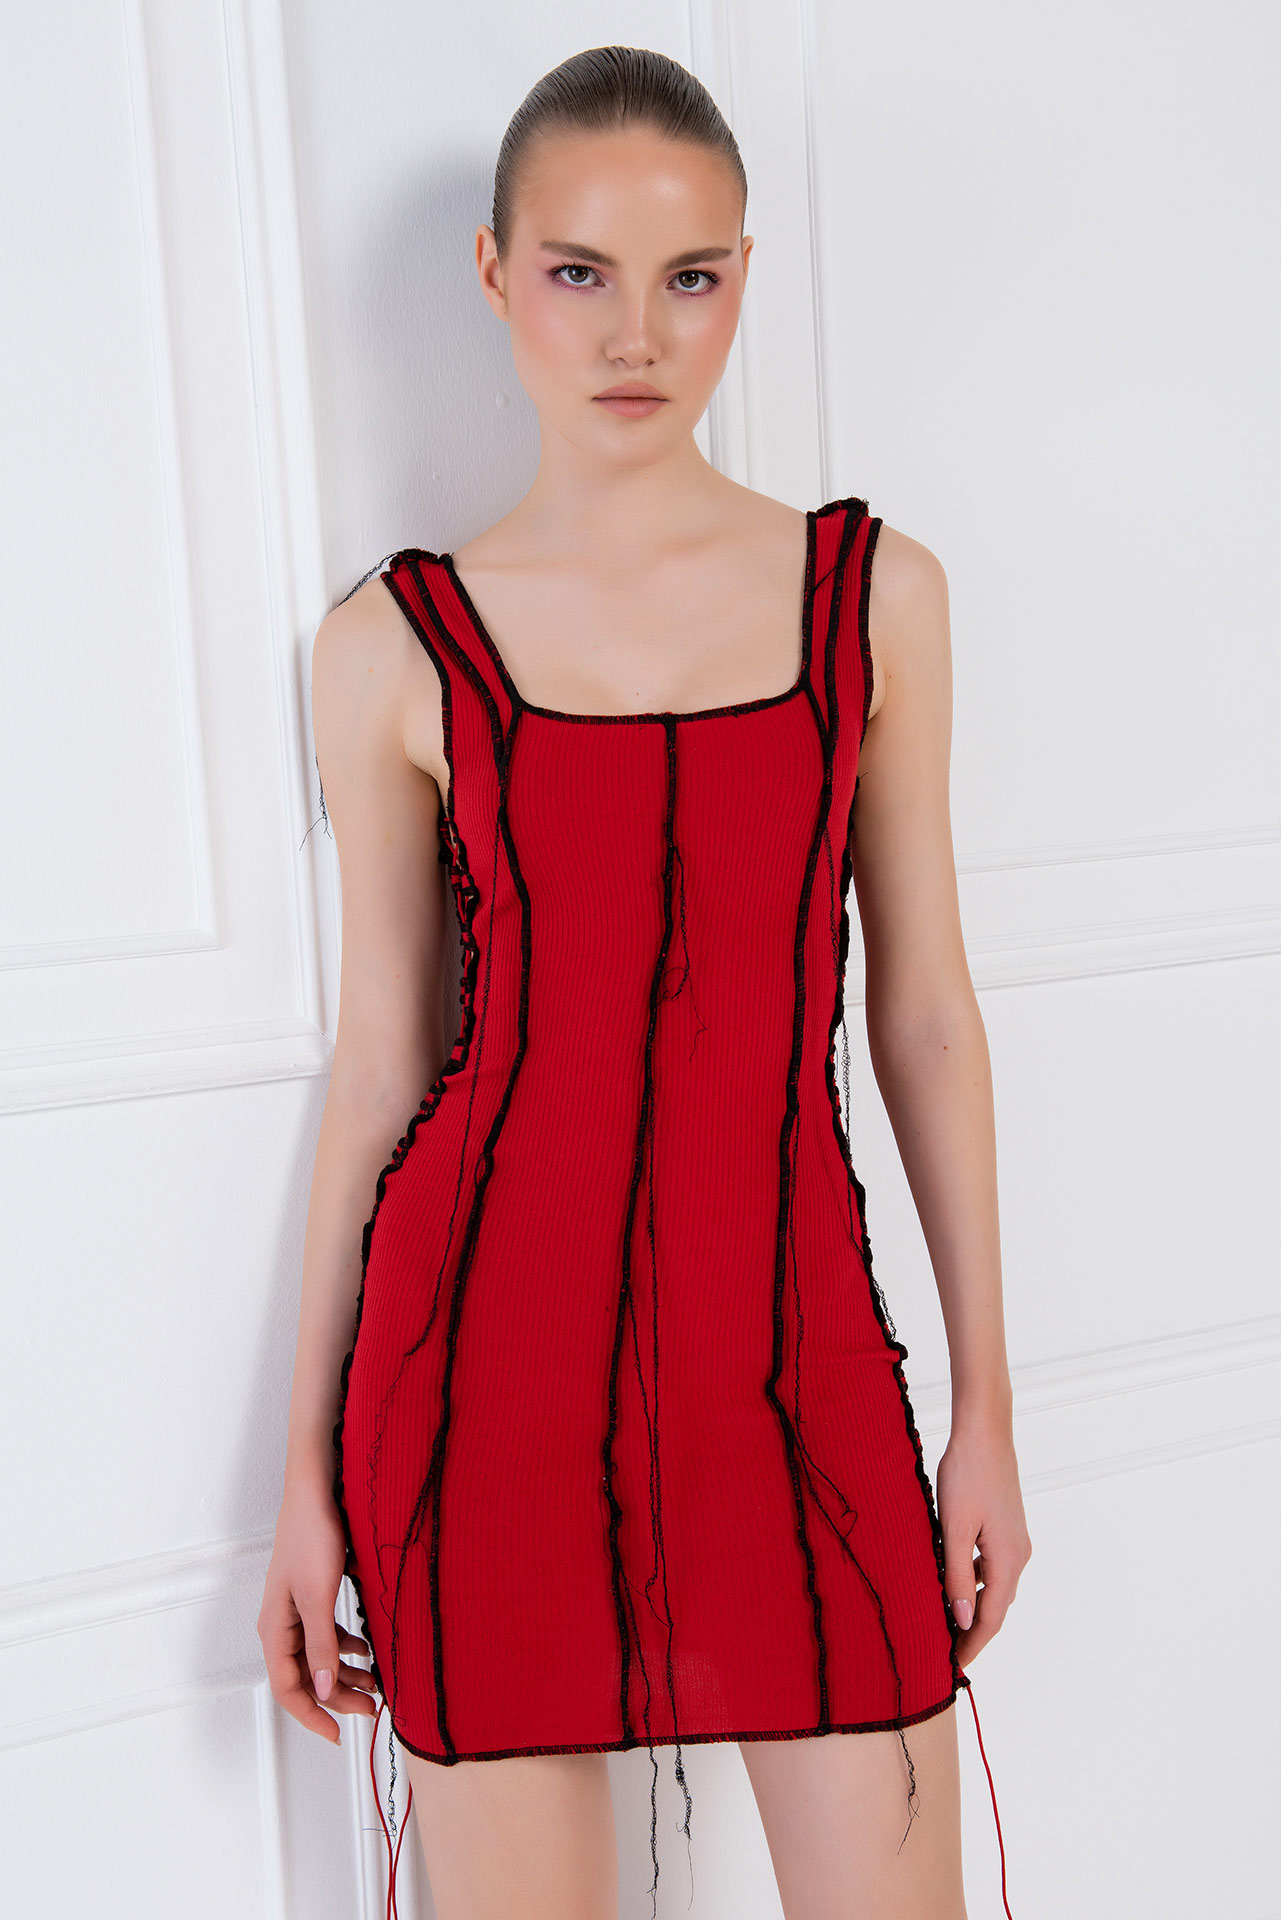 Wholesale Red Dress